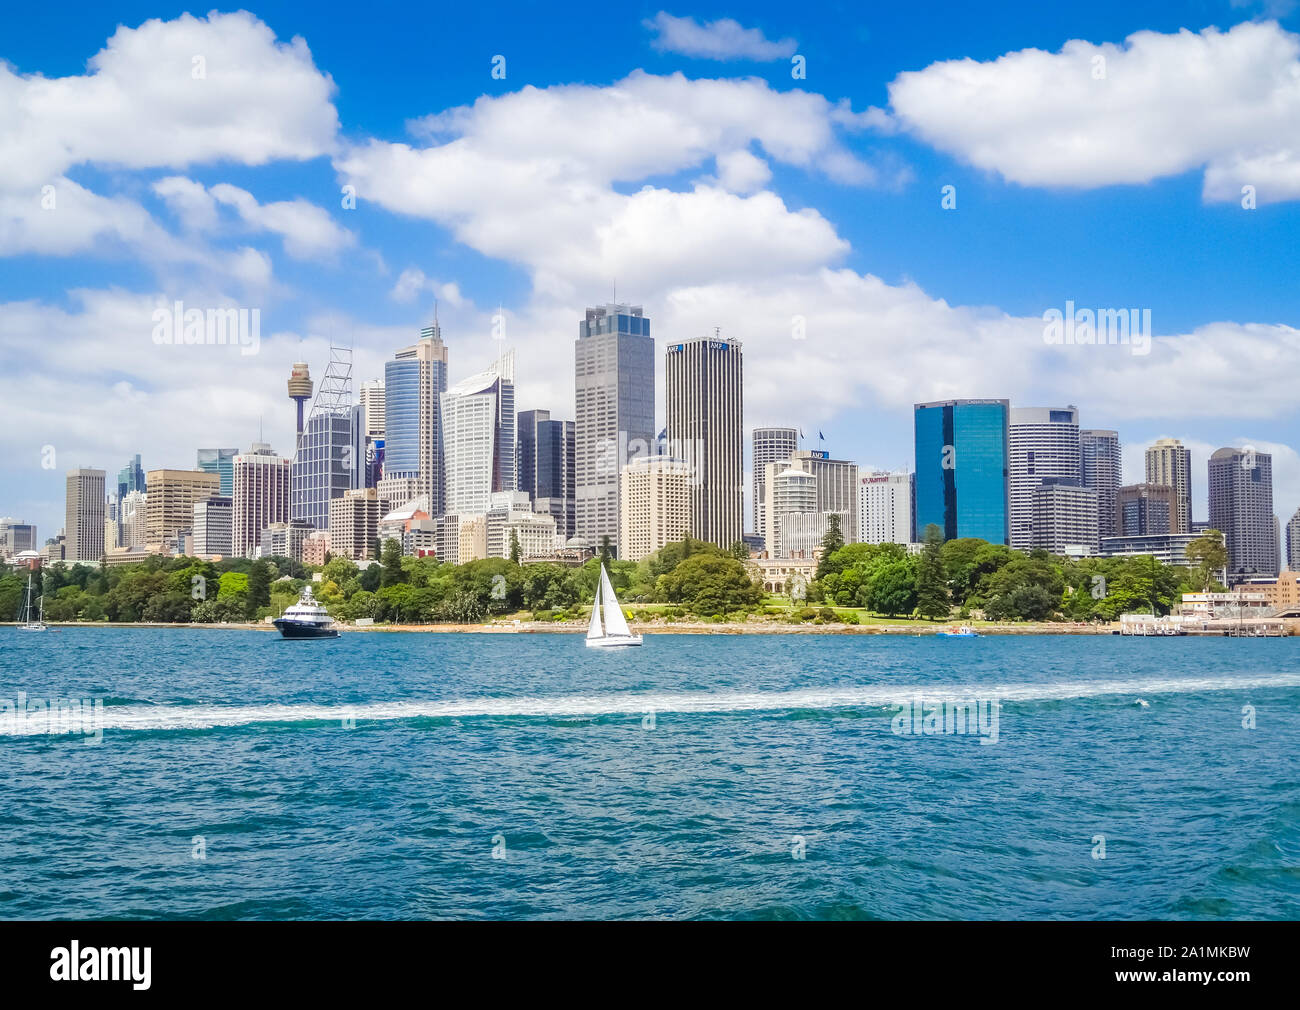 Stock photograph of the city skyline of Sydney, Australia with boats in the foreground. Stock Photo